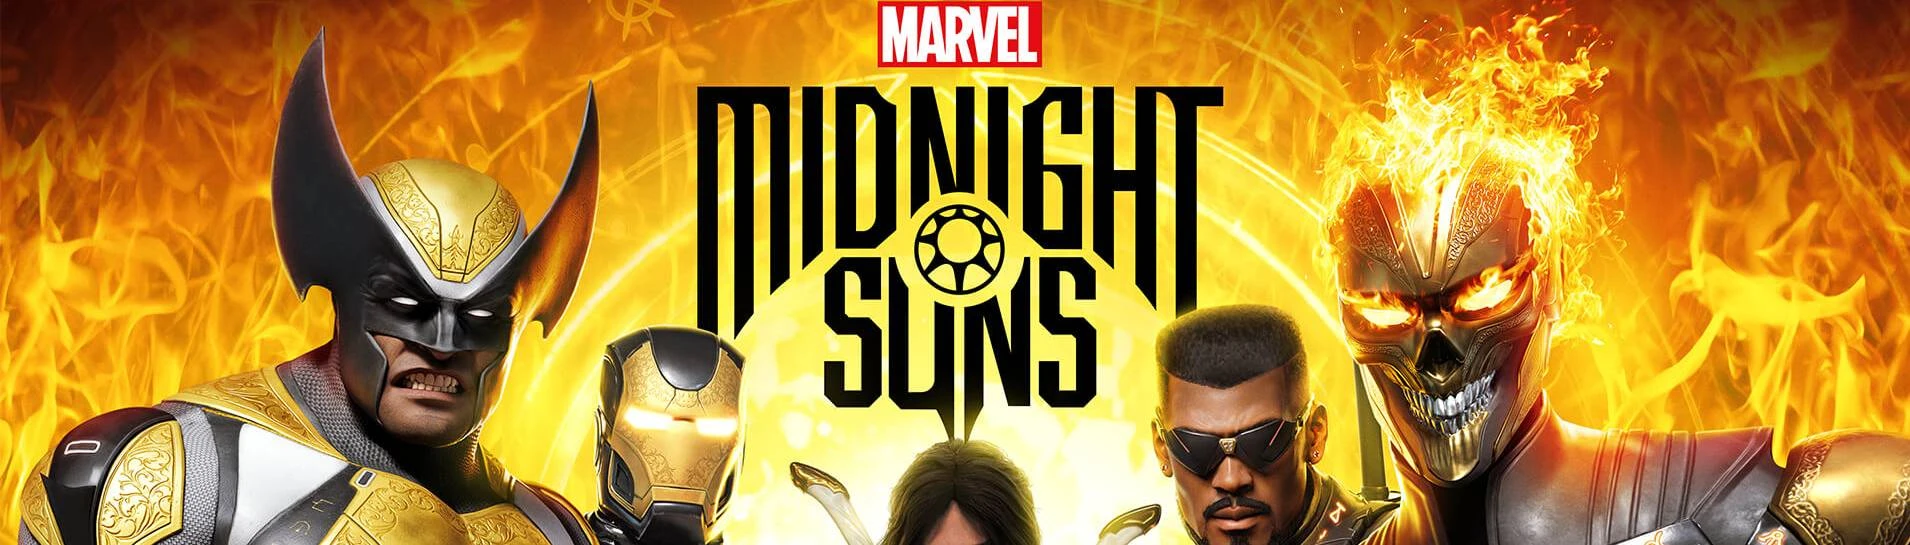 Mods of the month at Marvel's Midnight Suns Nexus - Mods and community